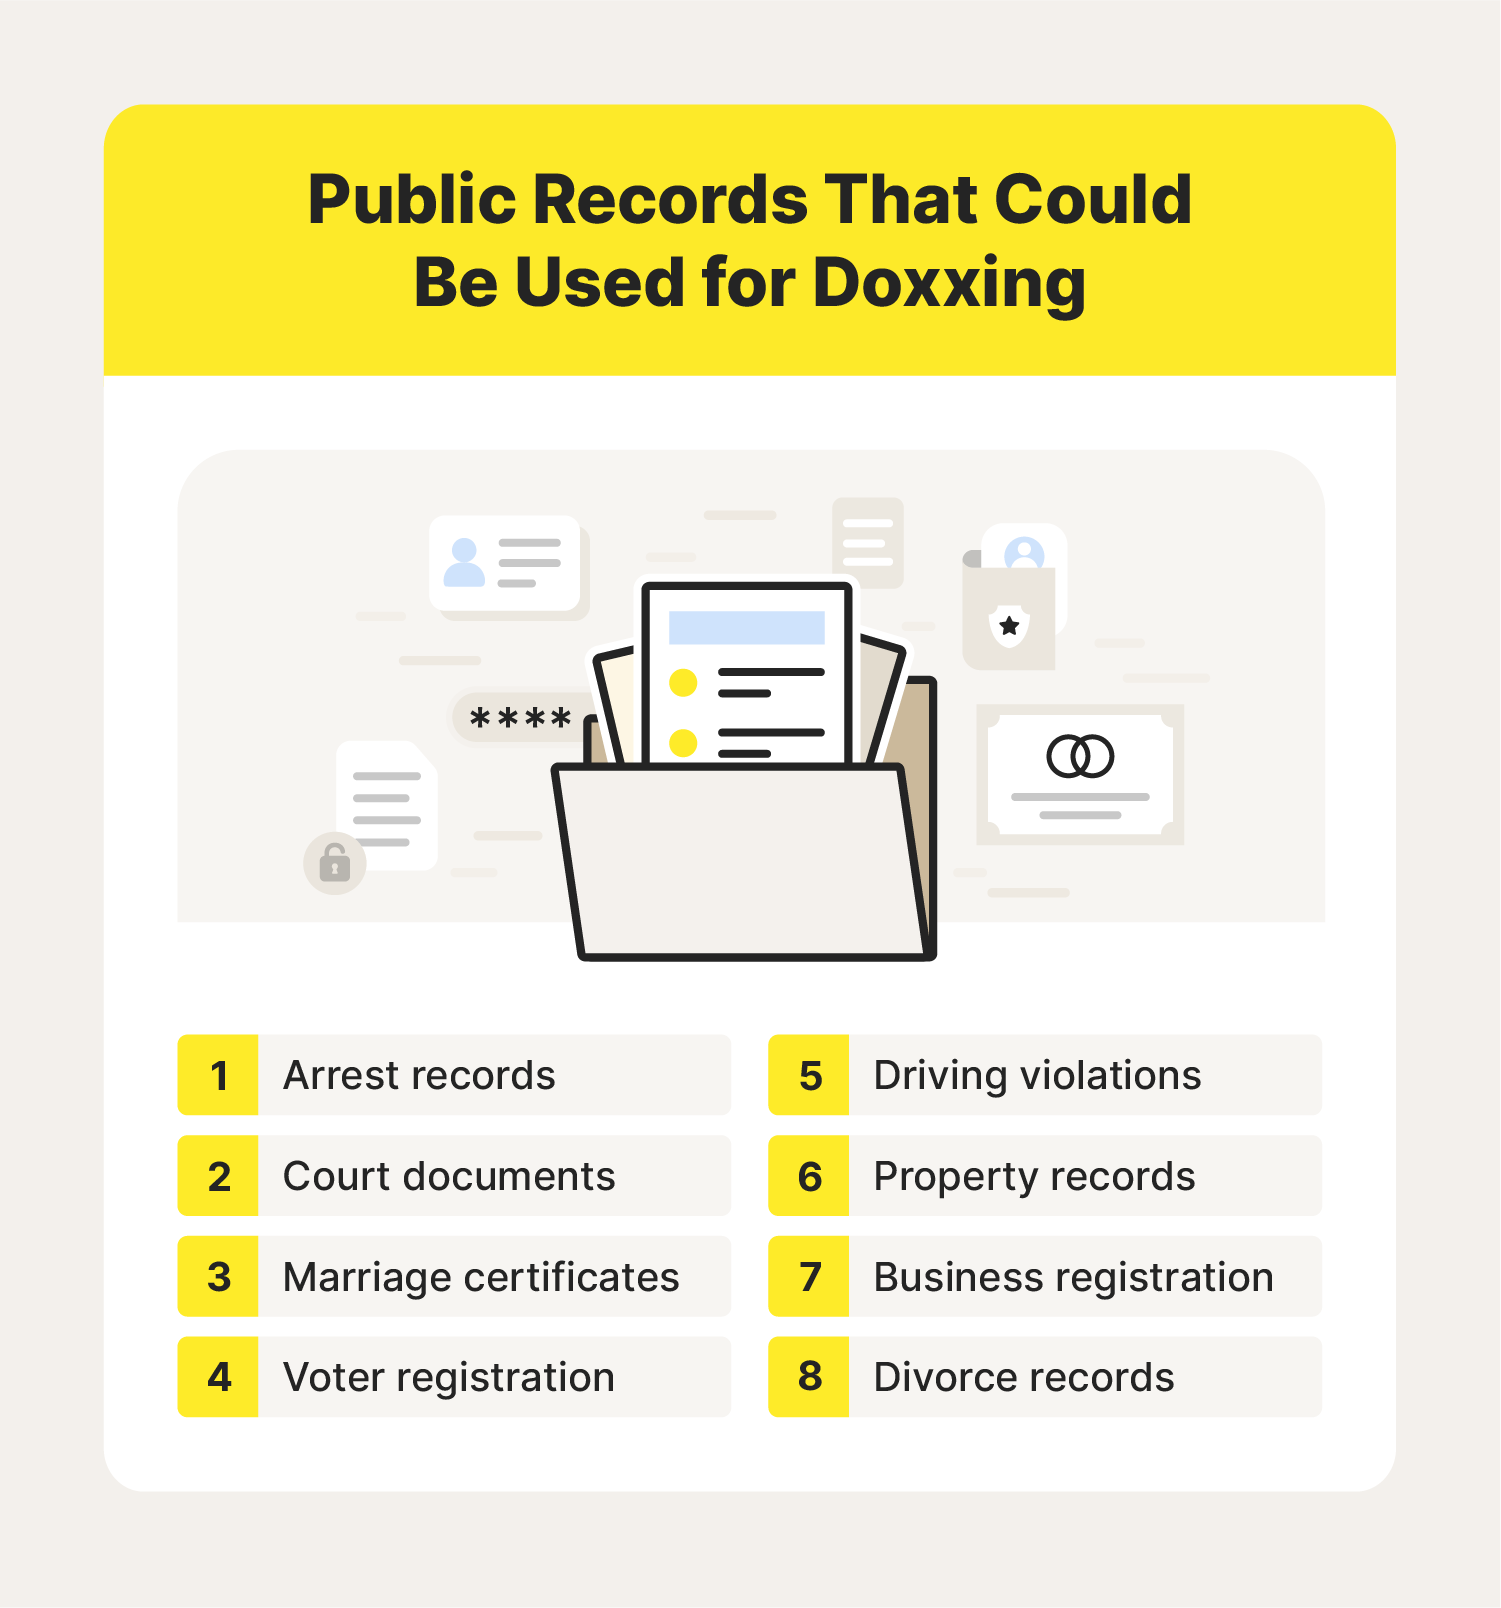 Doxxers often use public records like arrest records, court documents, marriage certificates, voter registration, driving violations, property records, business registration, and divorce records to find information about their targets.